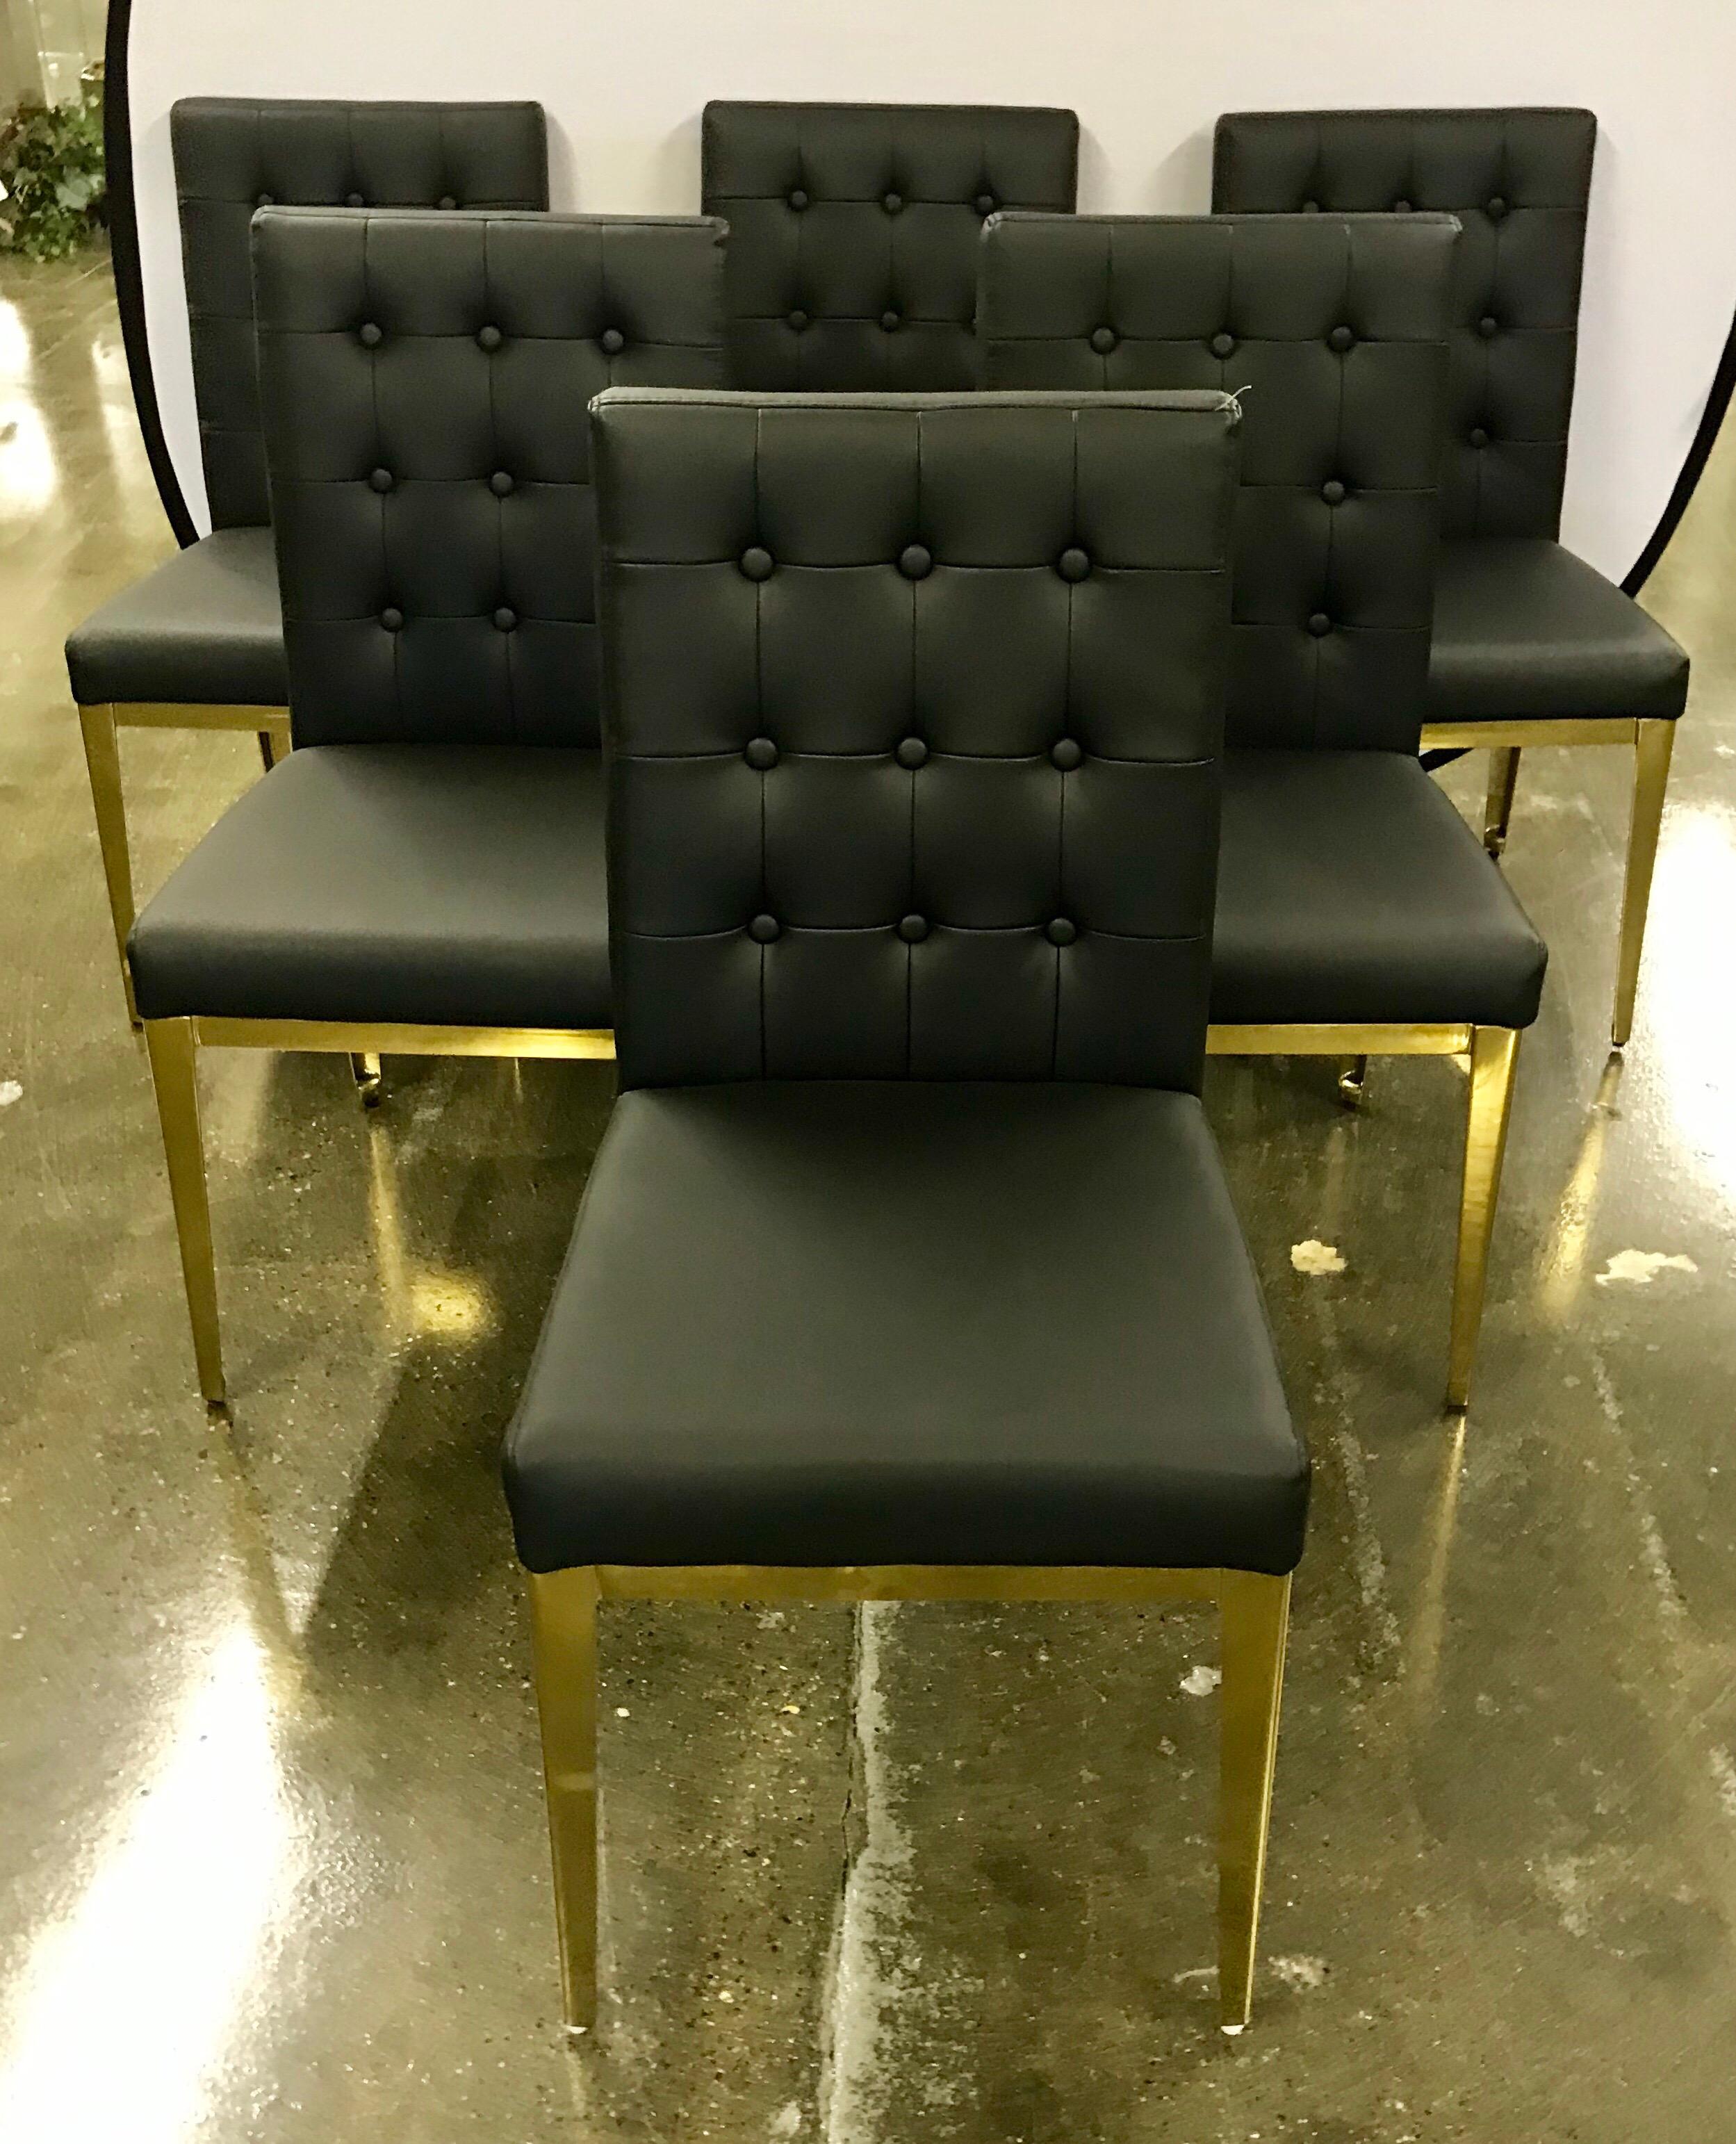 Luxurious set of six black leather and gold brass dining room chairs in mint condition; circa 21st century but with an eye towards the Mid-Century Modern era. This set of chairs will make any dining room pop!